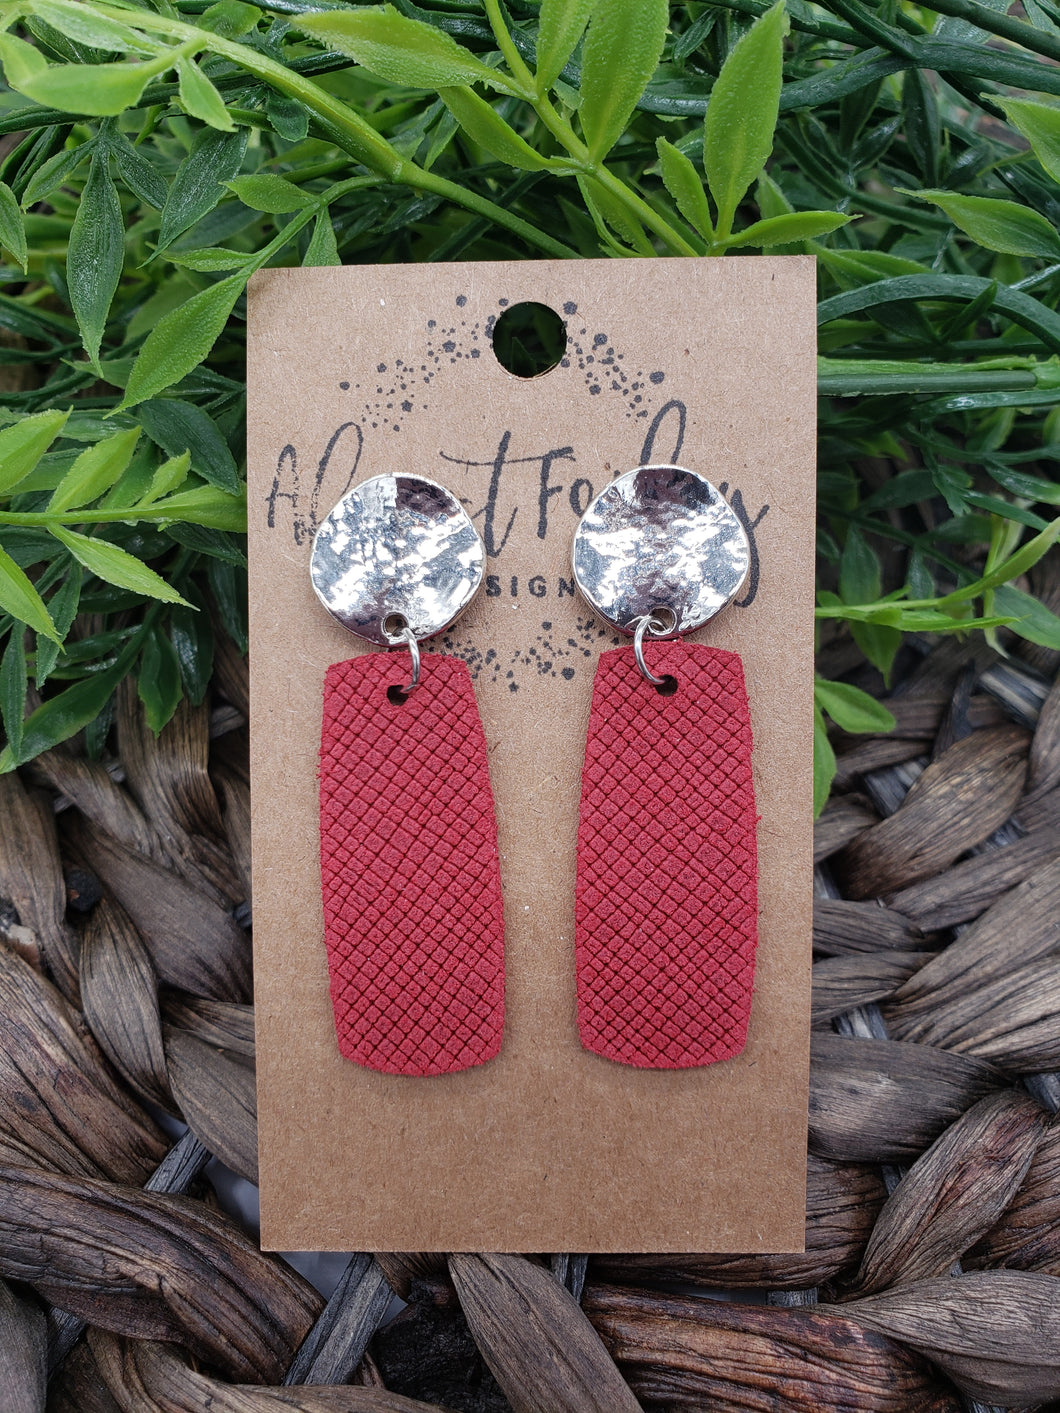 Genuine Leather Earrings - Bar - Red - Textured Earrings - Statement Earrings - Bar Earrings - Metal and Genuine Leather - Stud Posts